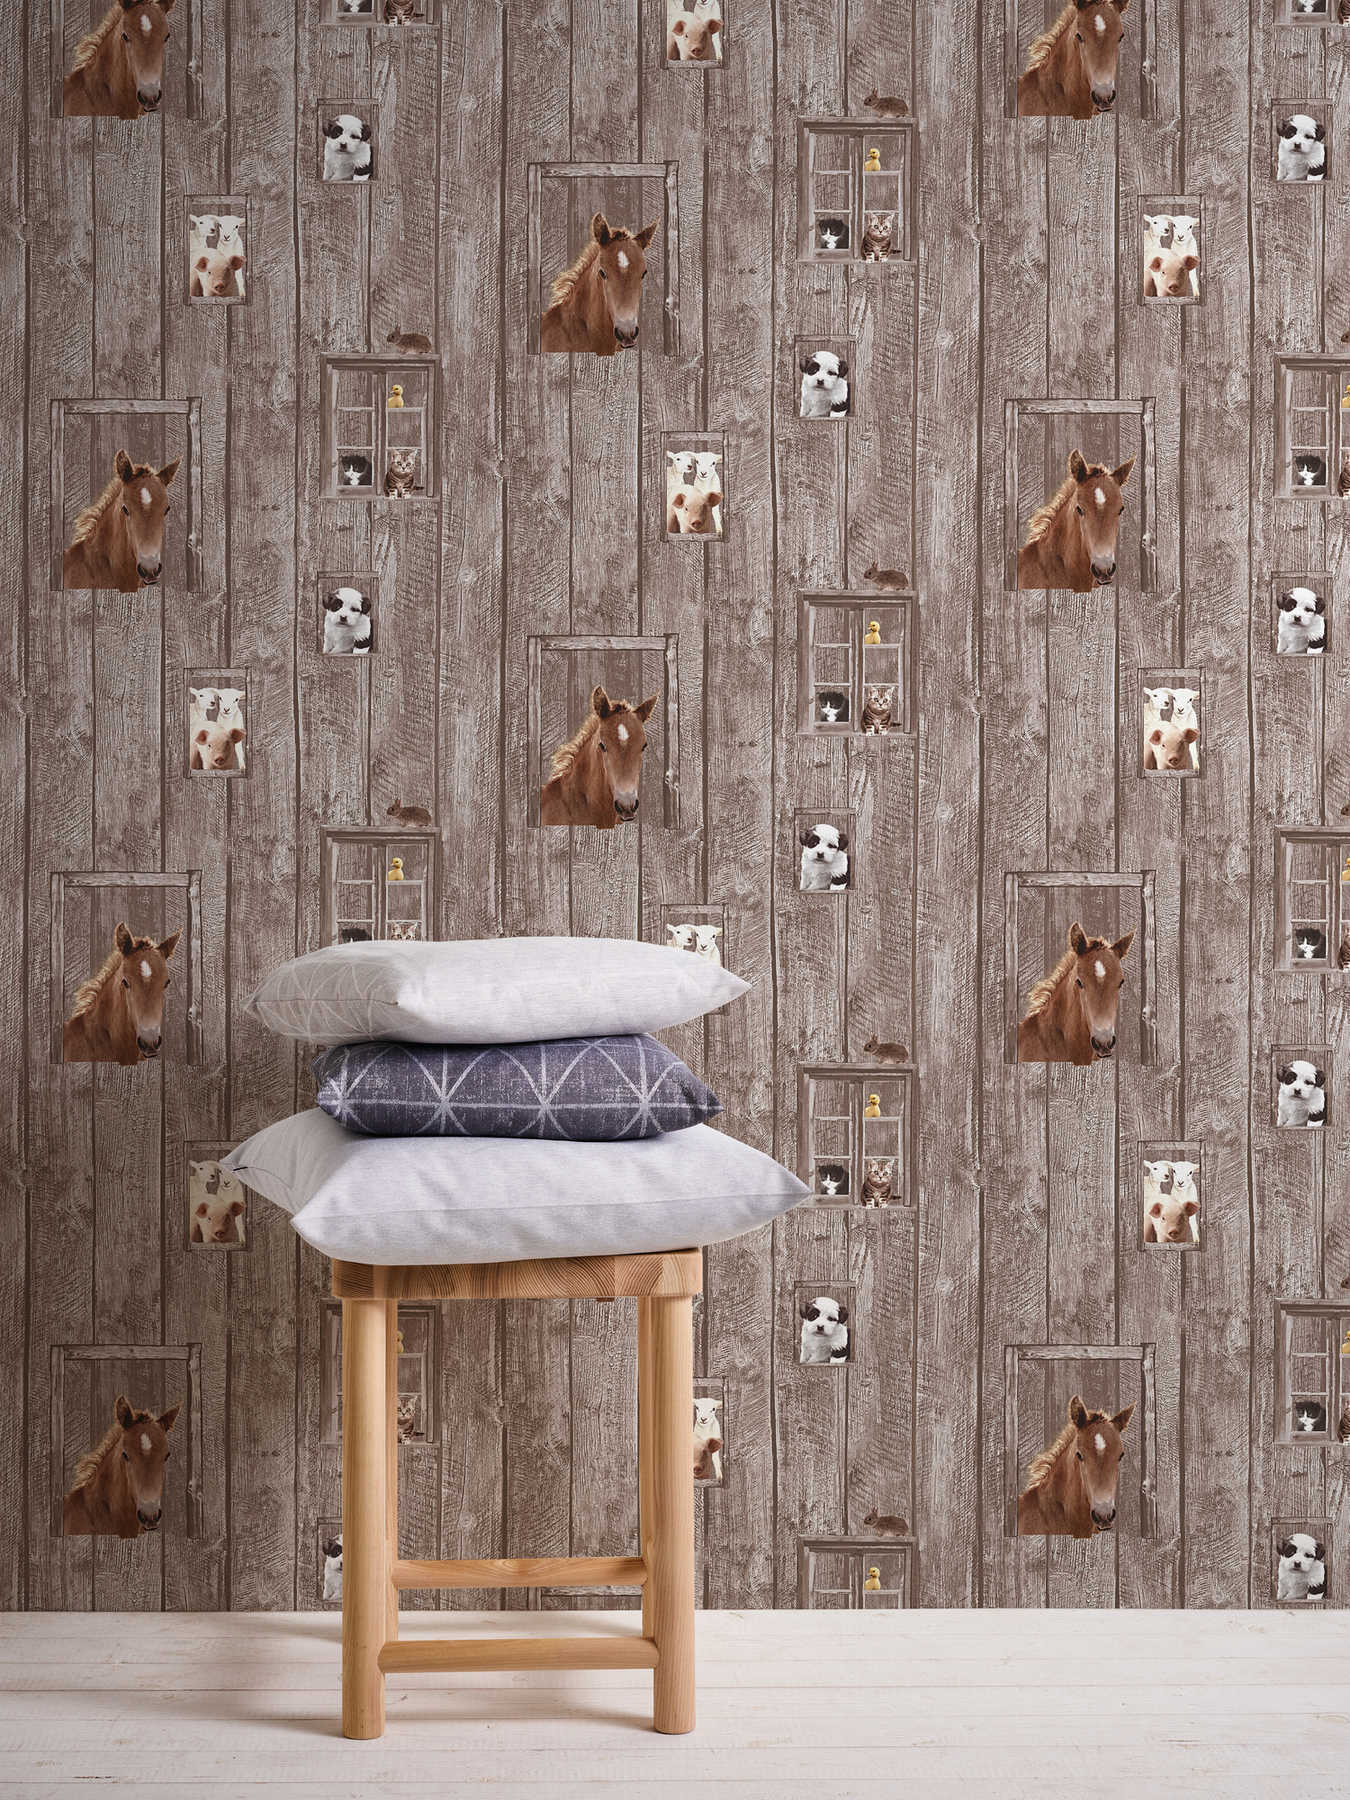             Paper wallpaper farm animals with wood look - multicoloured
        